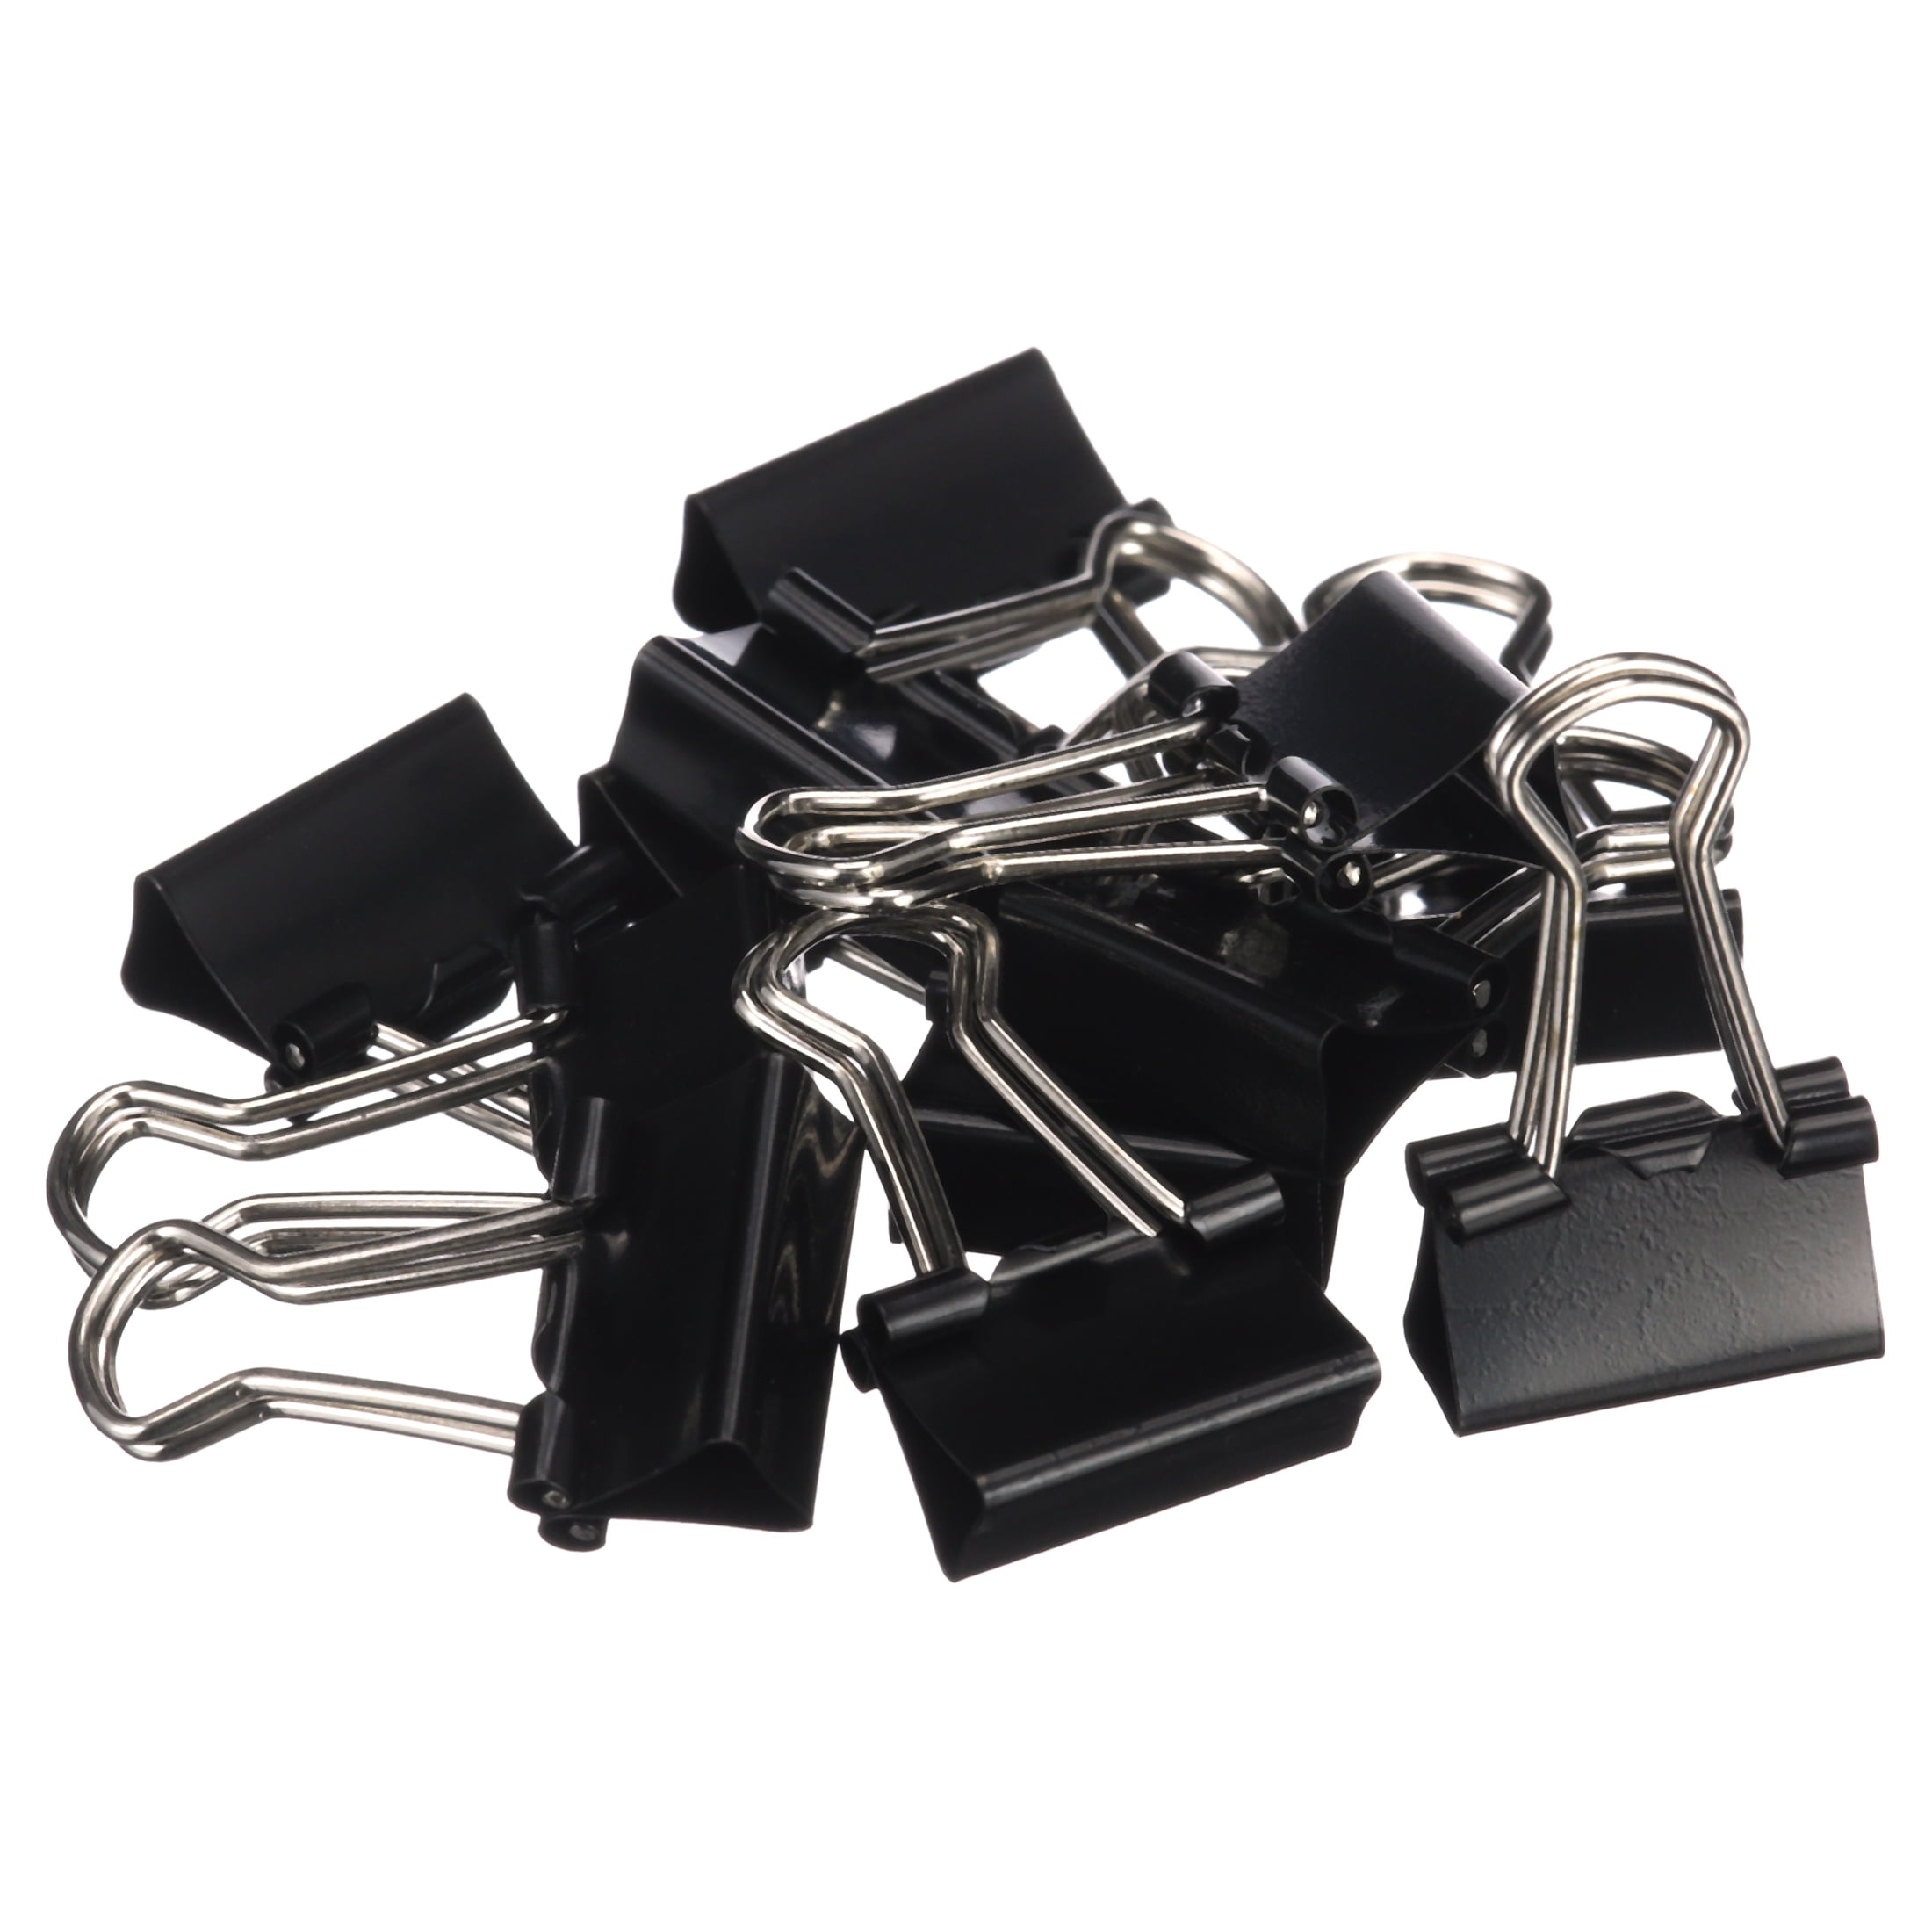 Officemate Mini Binder Clips, Black, 144 Pack (12 Boxes of 1 Dozen Each)  (99010) 